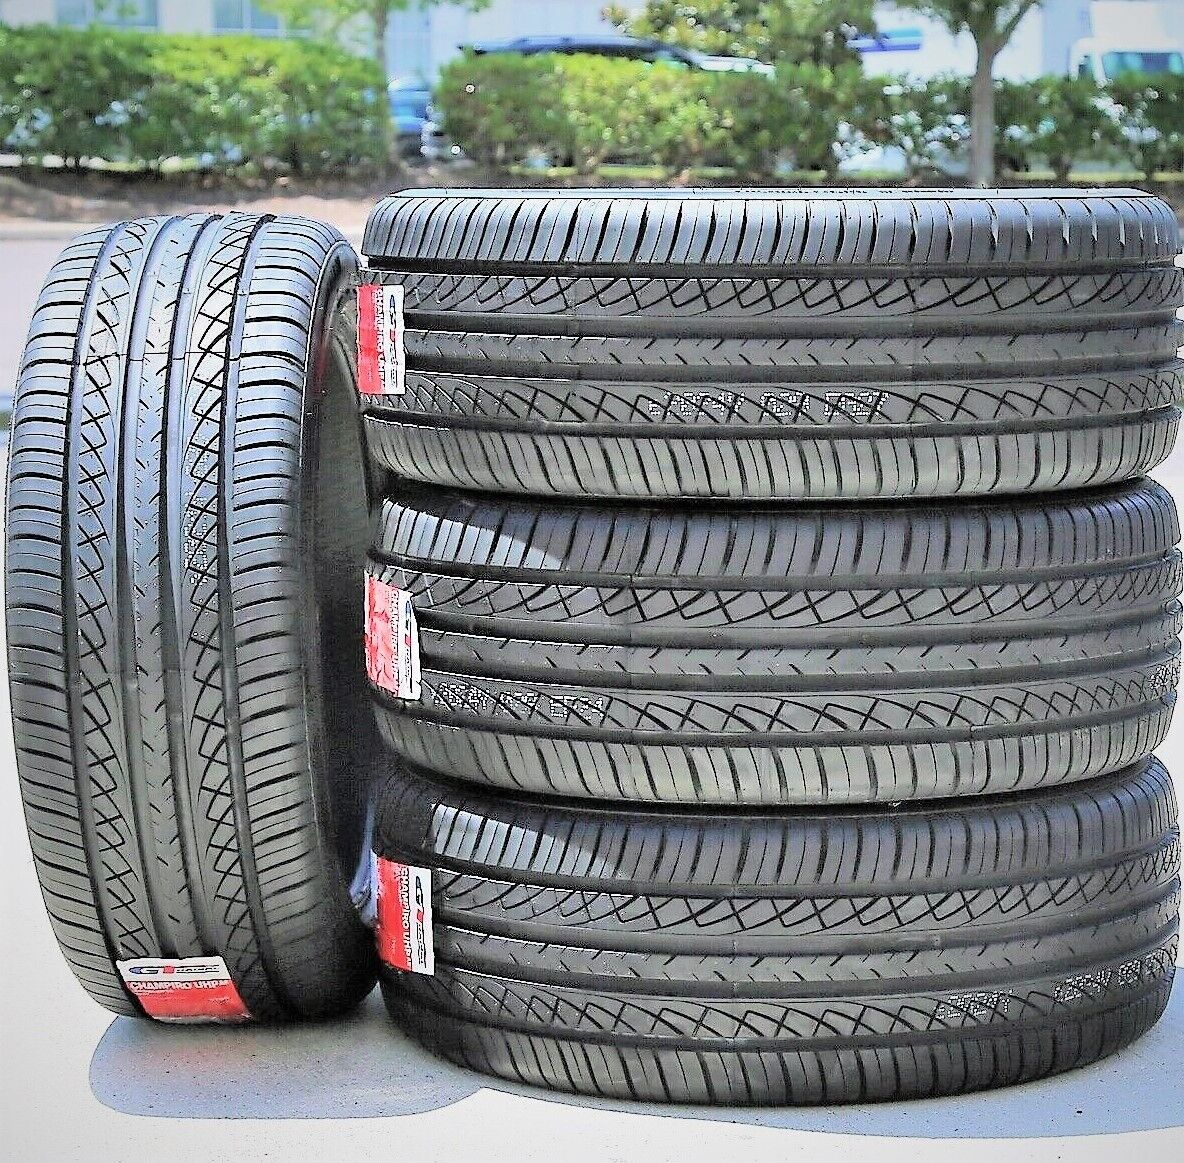 4 Tires GT Radial Champiro UHP A/S 235/45R18 94W Performance All Season